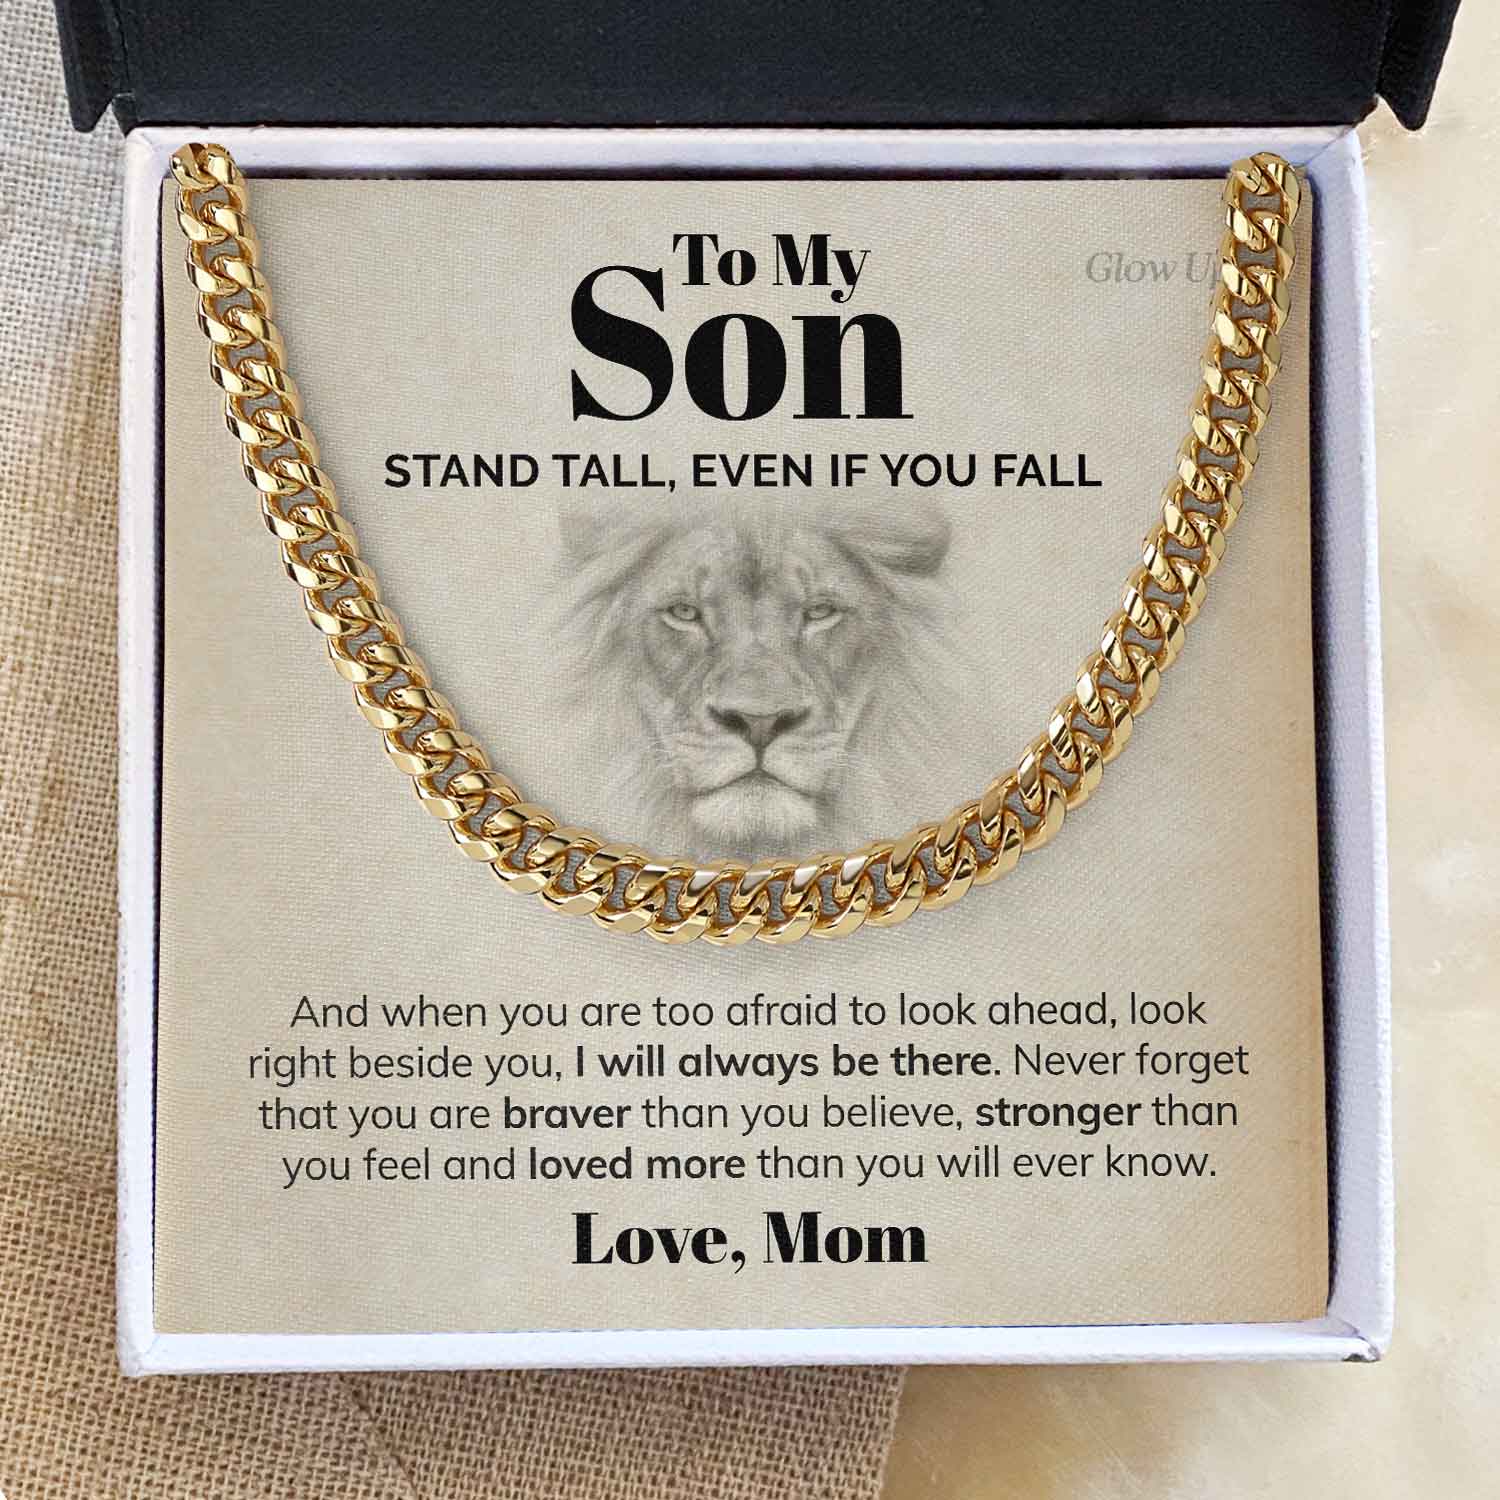 GlowUp 18k Gold Finish / Two-Toned Box To my Son - Stand Tall - Cuban Link Chain Necklace